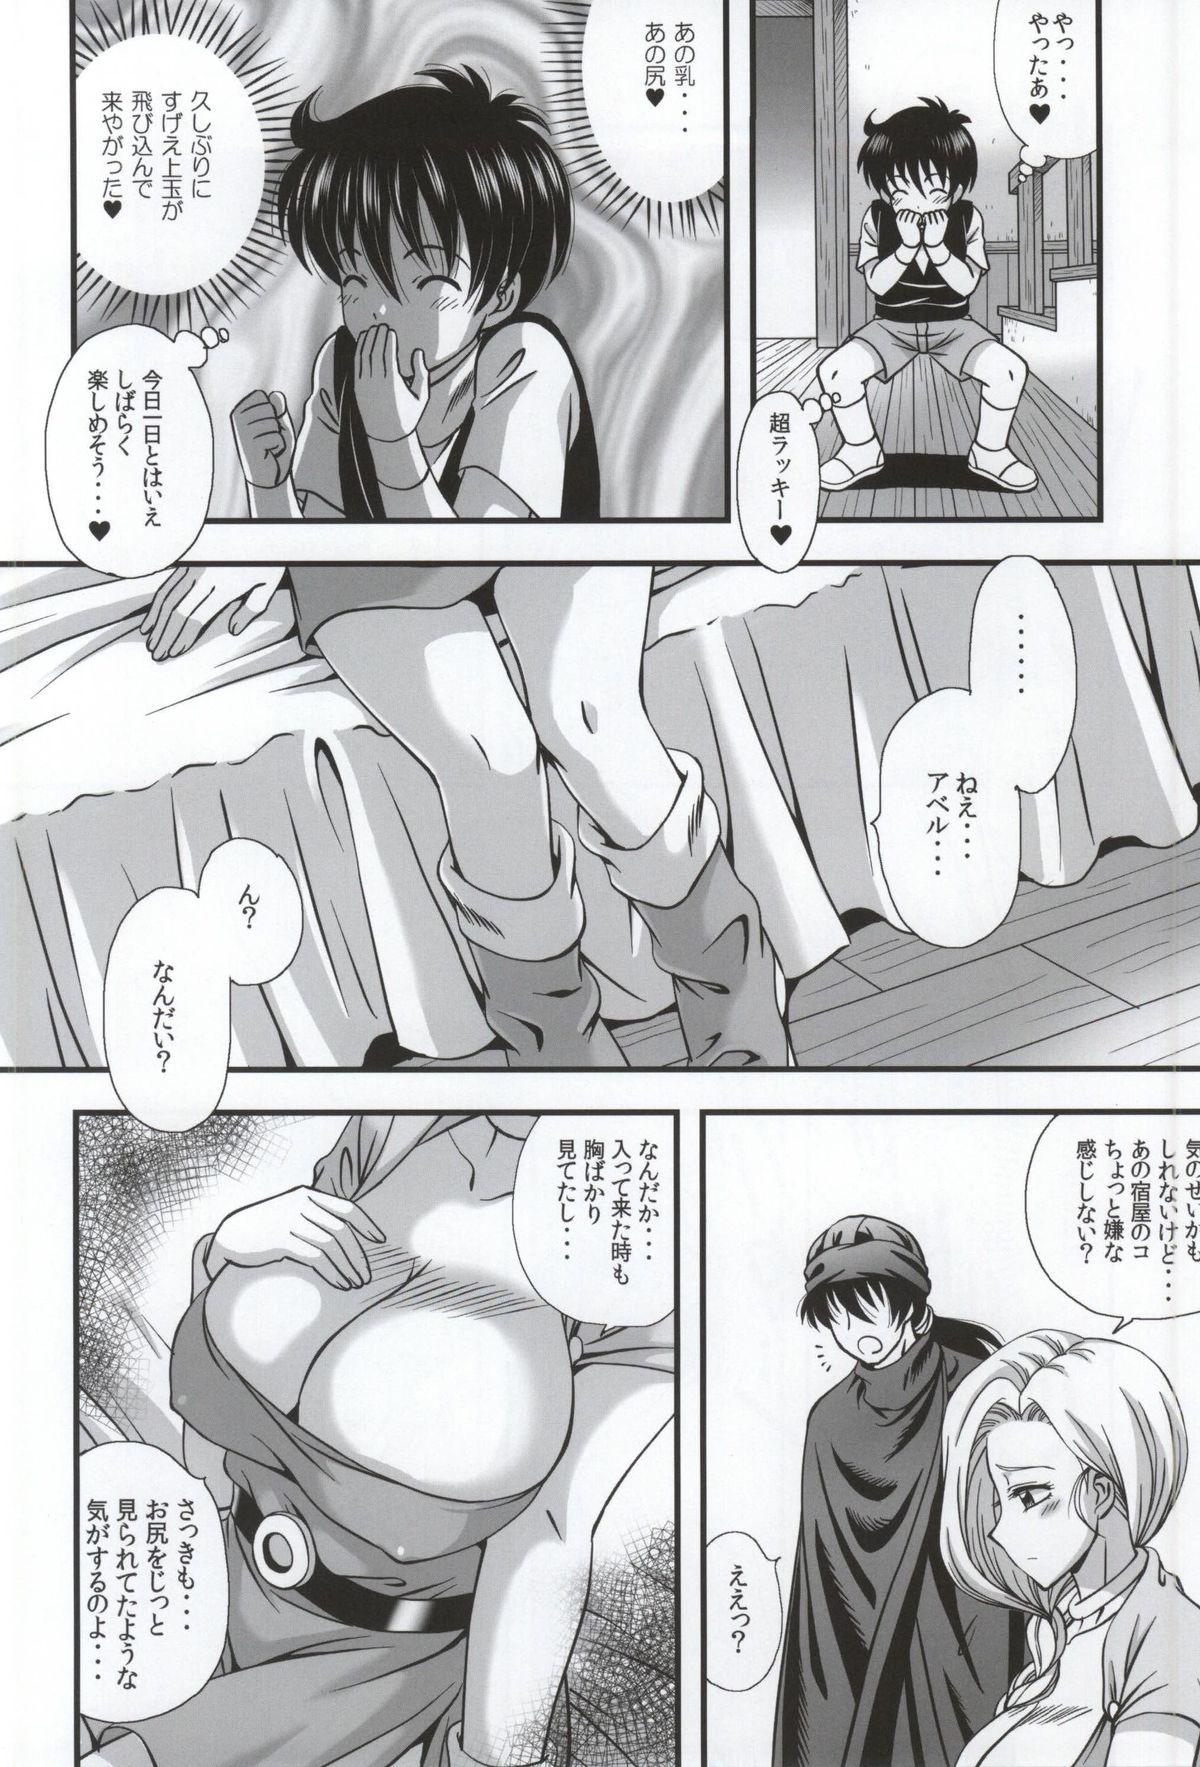 Moaning Bianca to Masegaki - Dragon quest v Chicks - Page 5